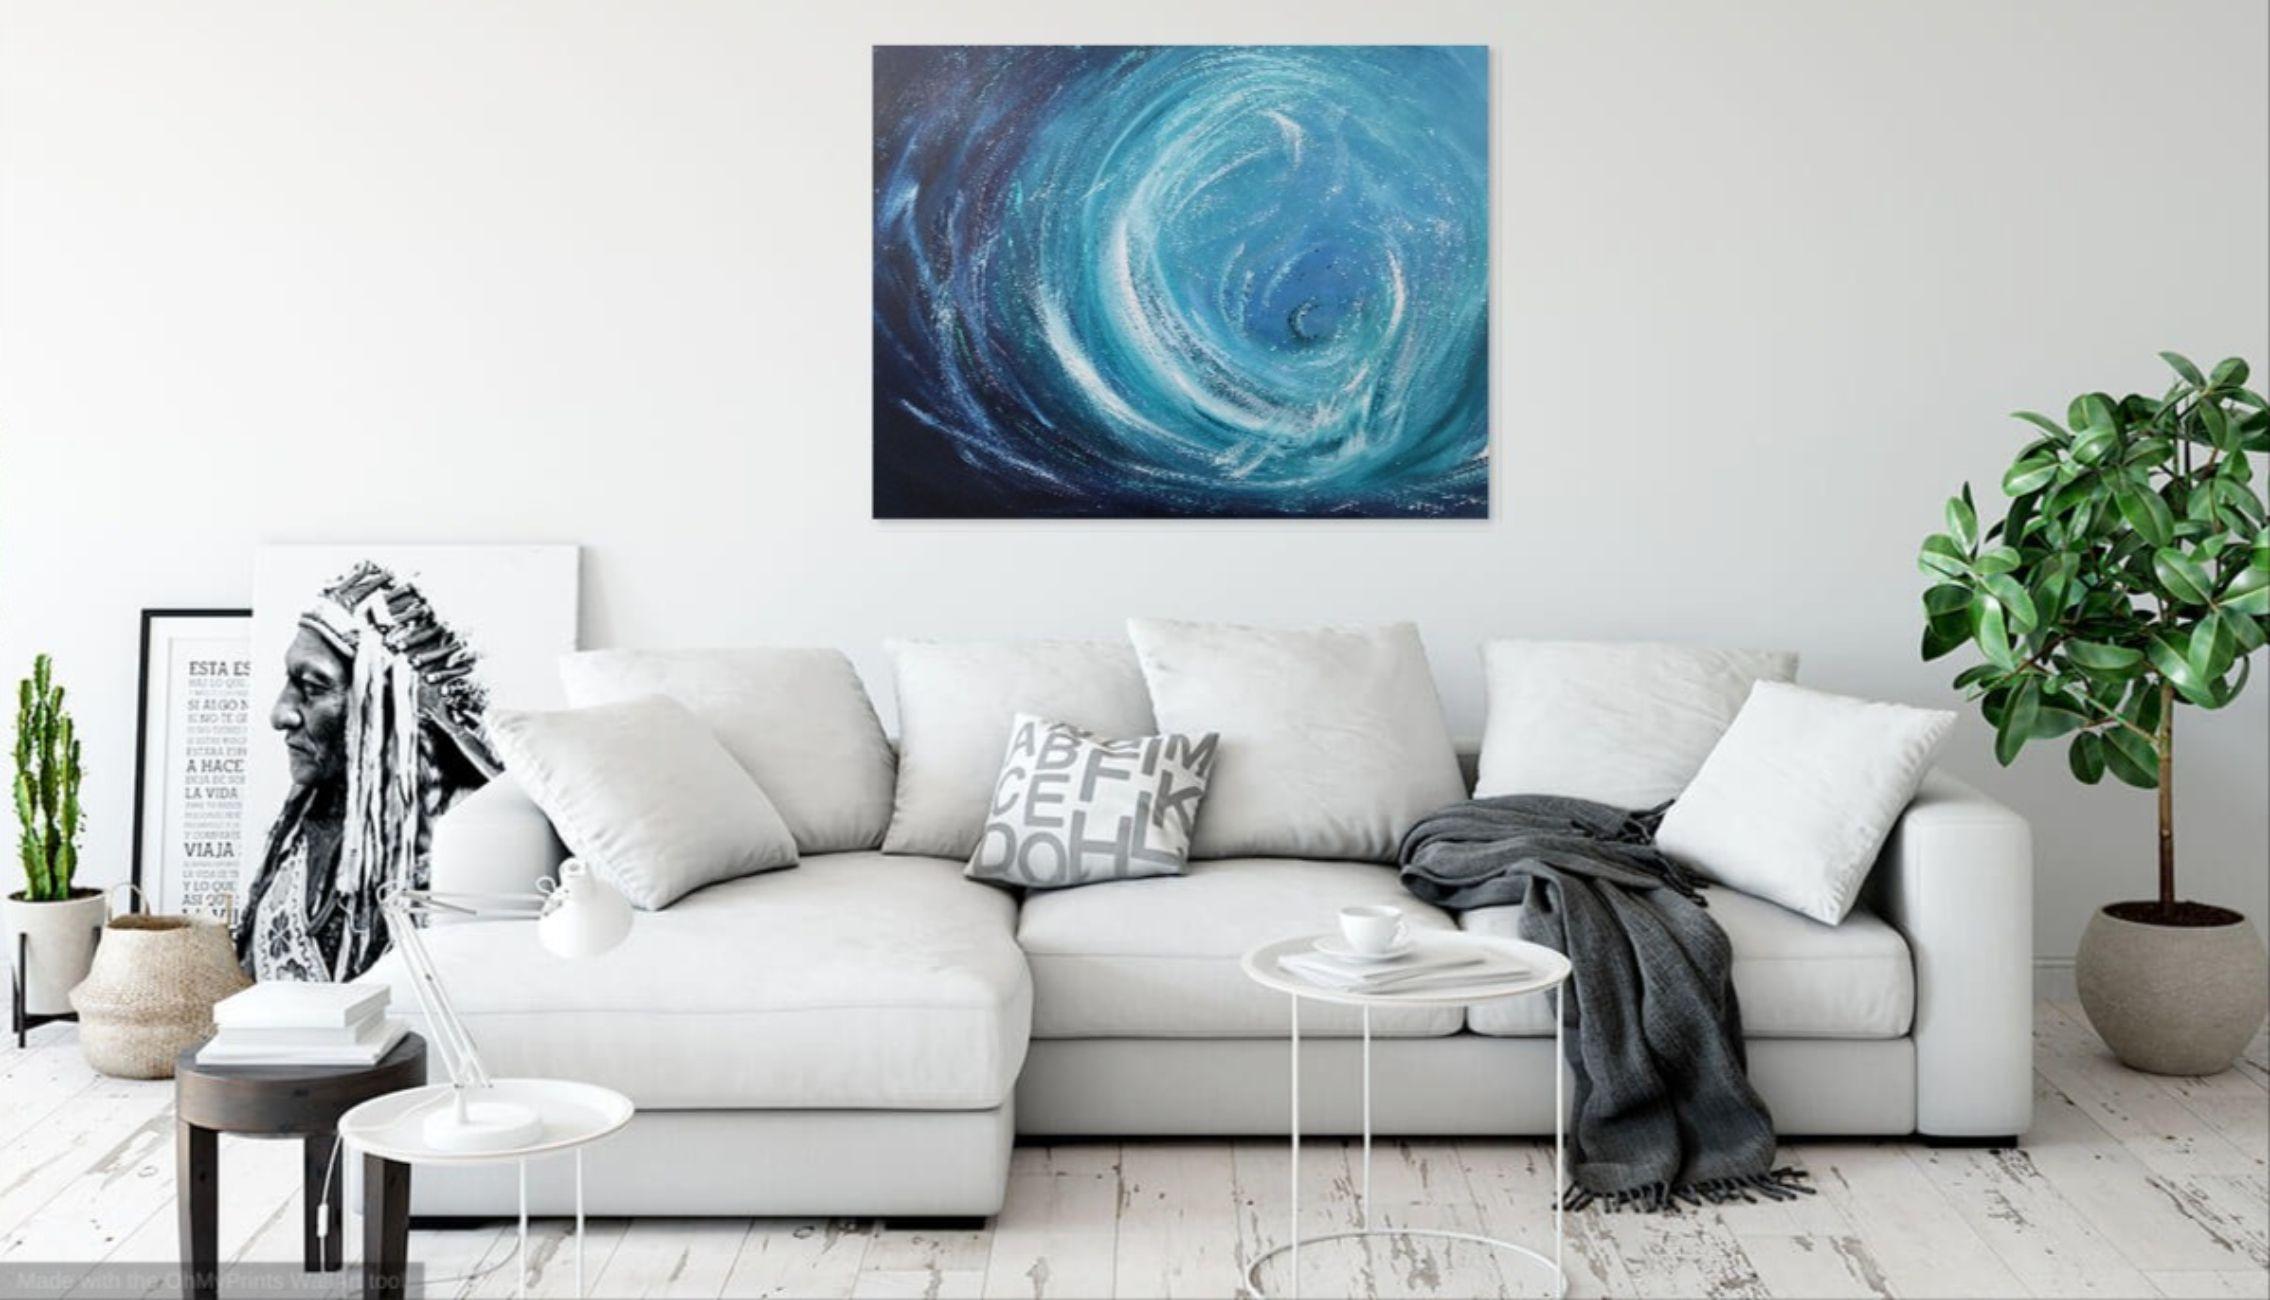 A stunning force of nature, inspiring and mesmerising for any wall. This is large format, inspirational, full of movement, energy, intensity and emotion. Whoever decides to purchase this is purchasing pure emotion on canvas. With the gorgeous teal,